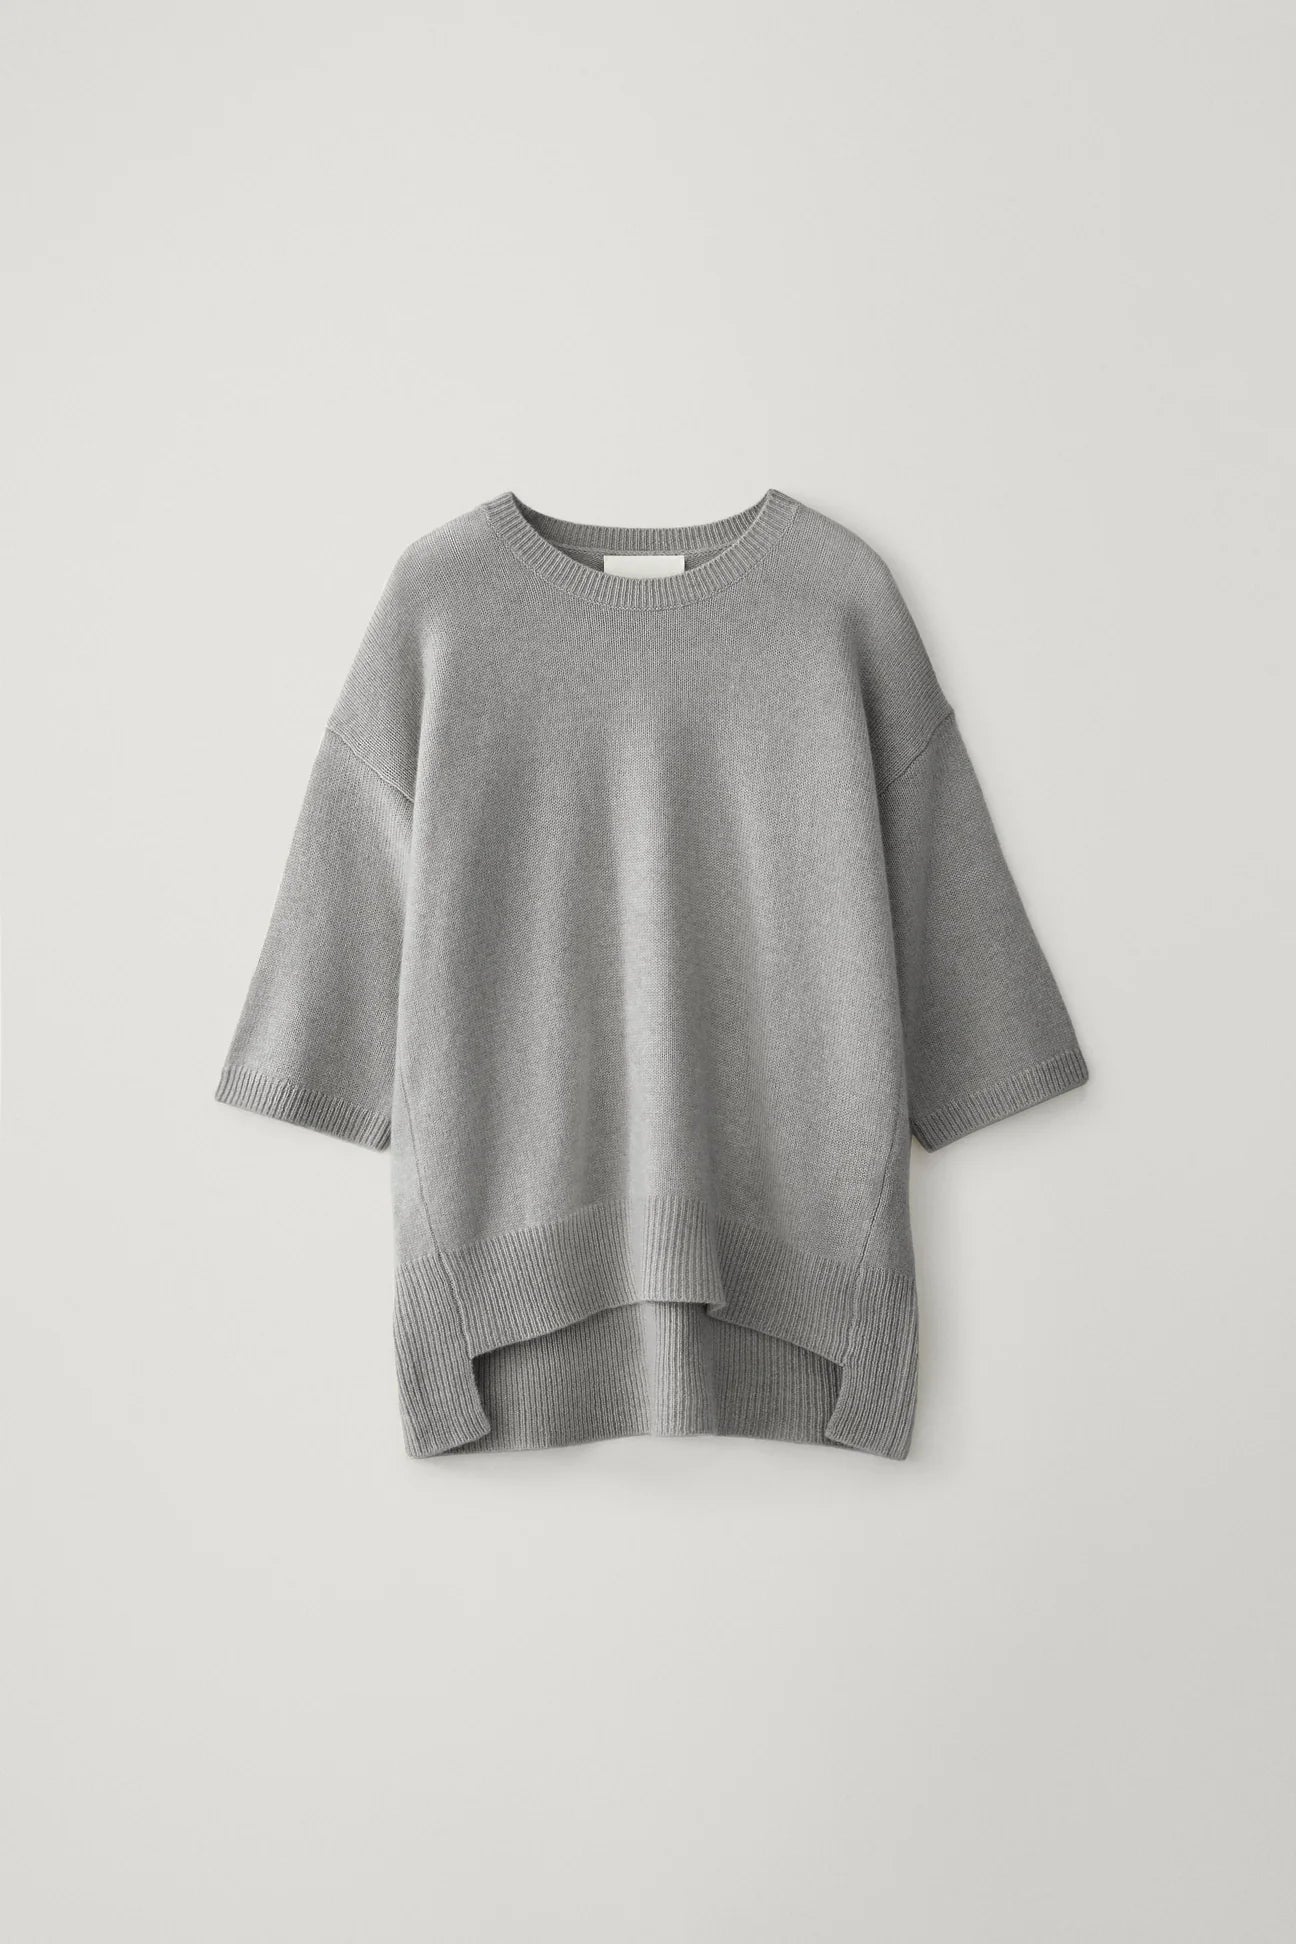 Lisa Yang Camille Cashmere Sweater